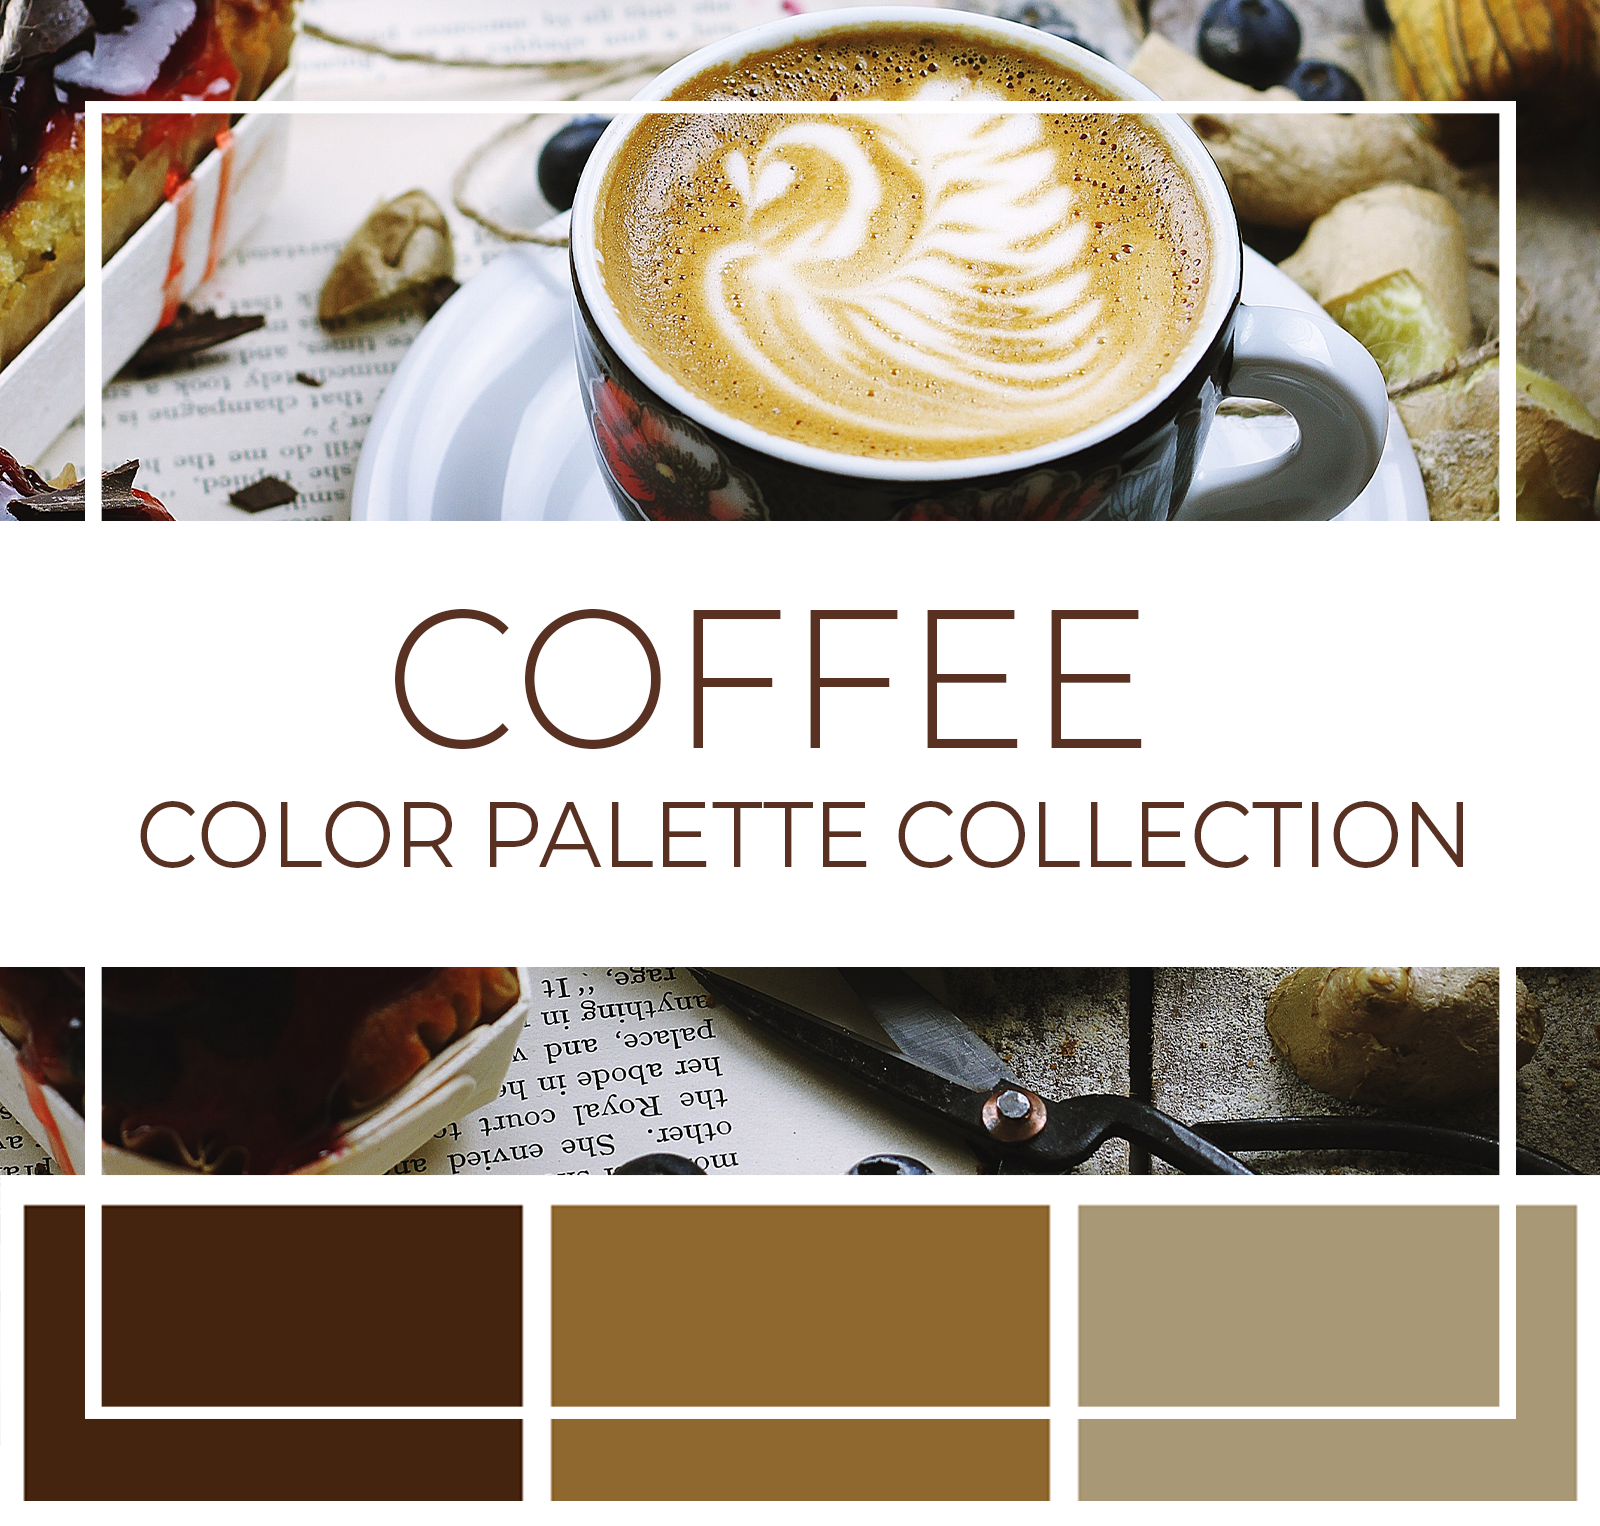 Coffee Color Palette Collection - Amsberry's Painting Company